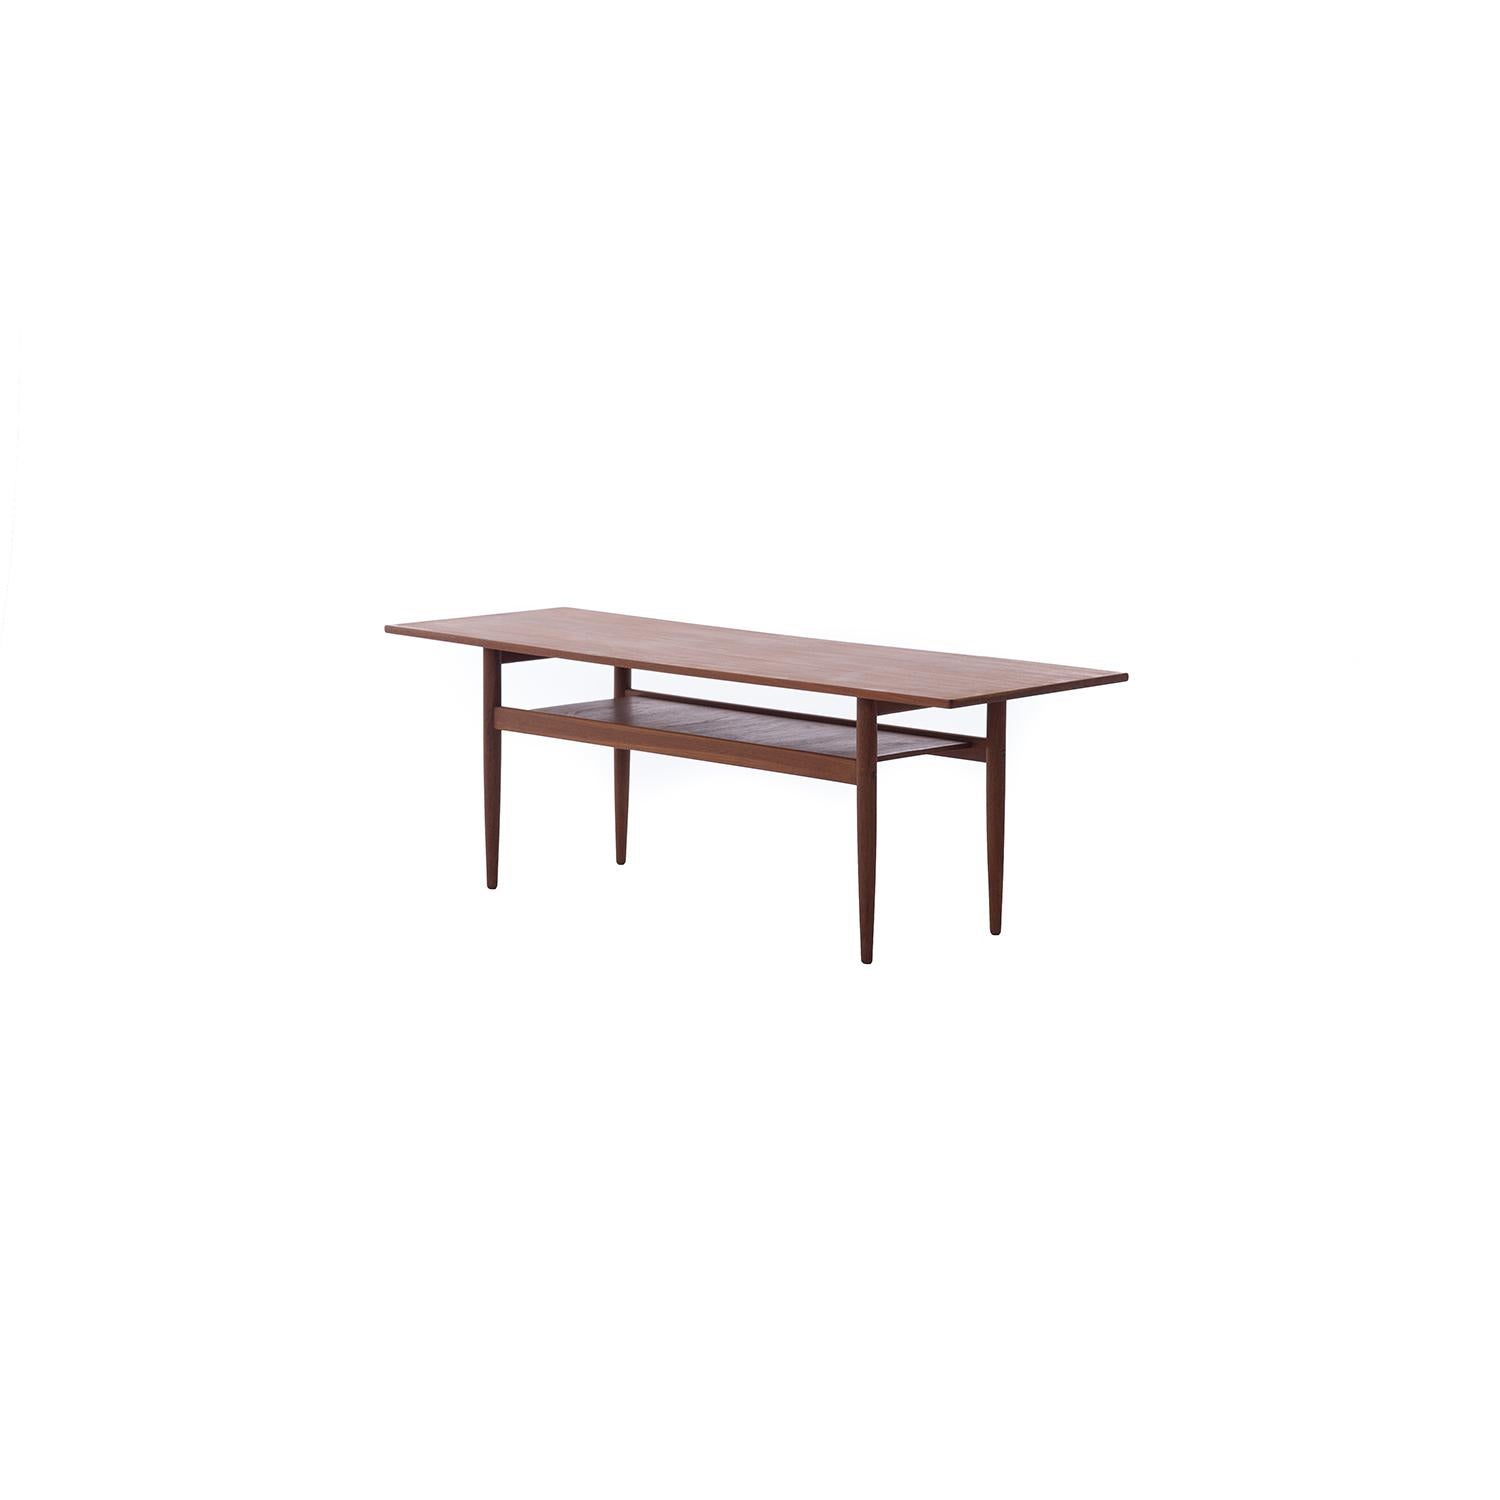 Simple clean lines make this table an easy addition to any seating ensemble. Higher top surface then your average mid-century coffee table. The table has small edge detail, shelf grain runs in opposition to grain of table. 

Professional, skilled